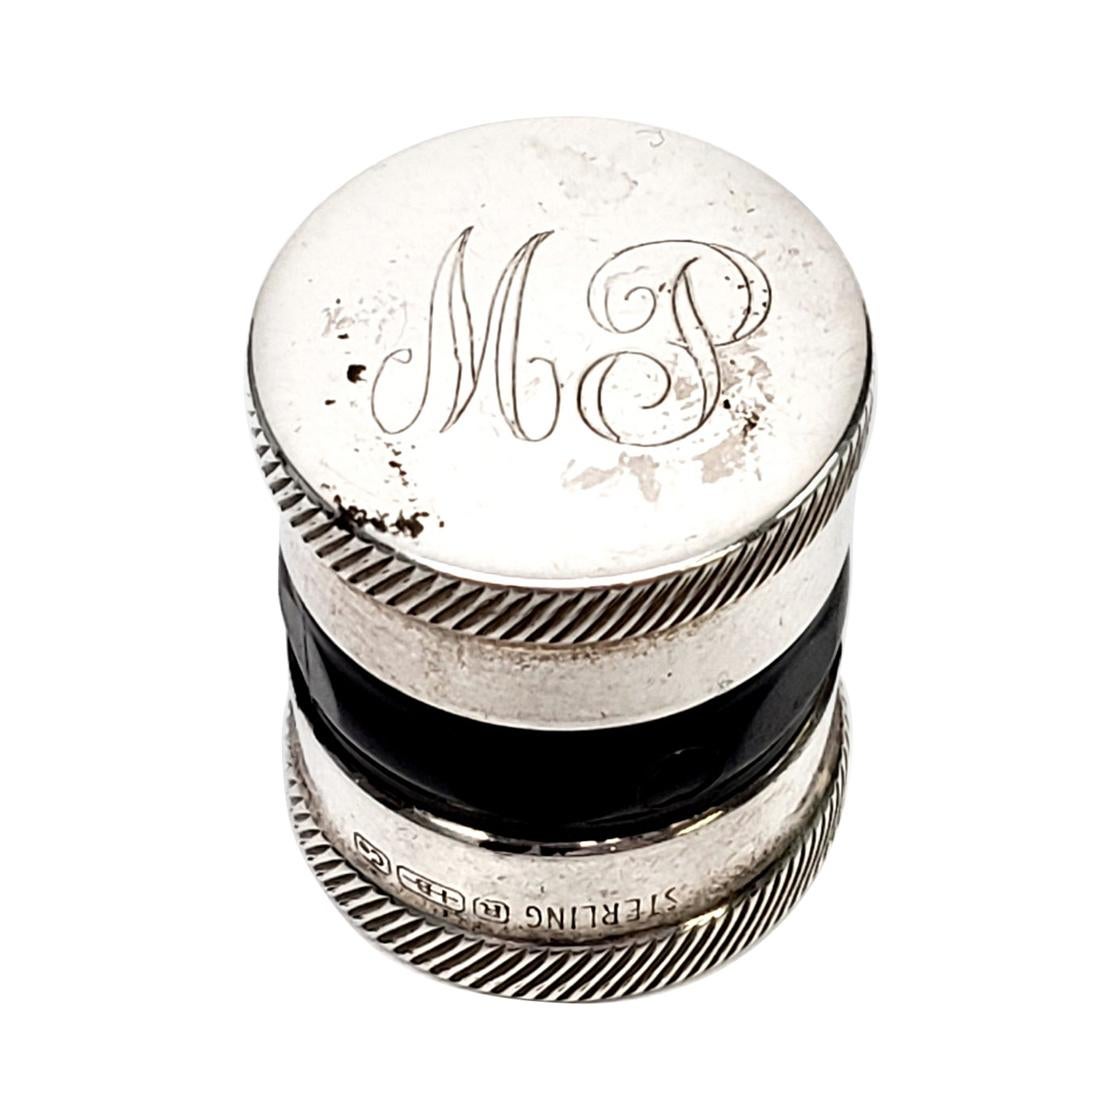 R. Blackington Sterling Silver Contact Lens Case with Monogram